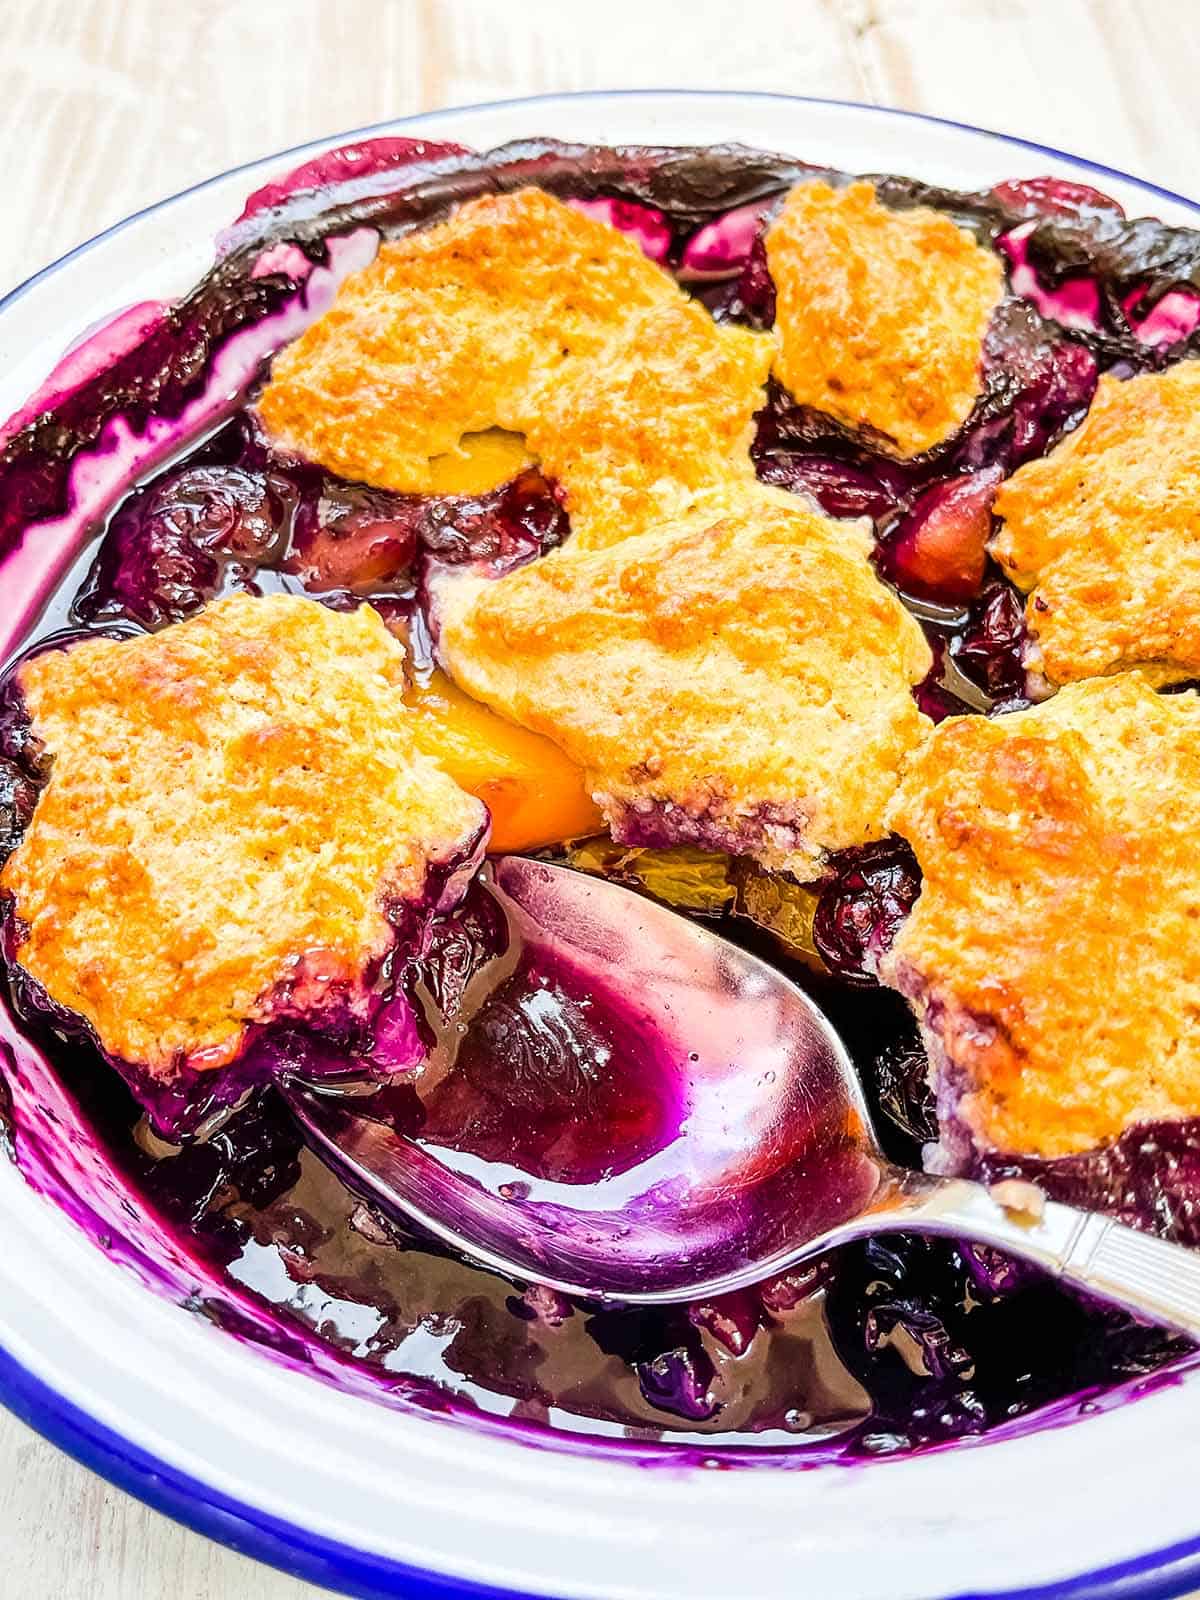 A close up picture of a dish of blueberry and peach cobbler.